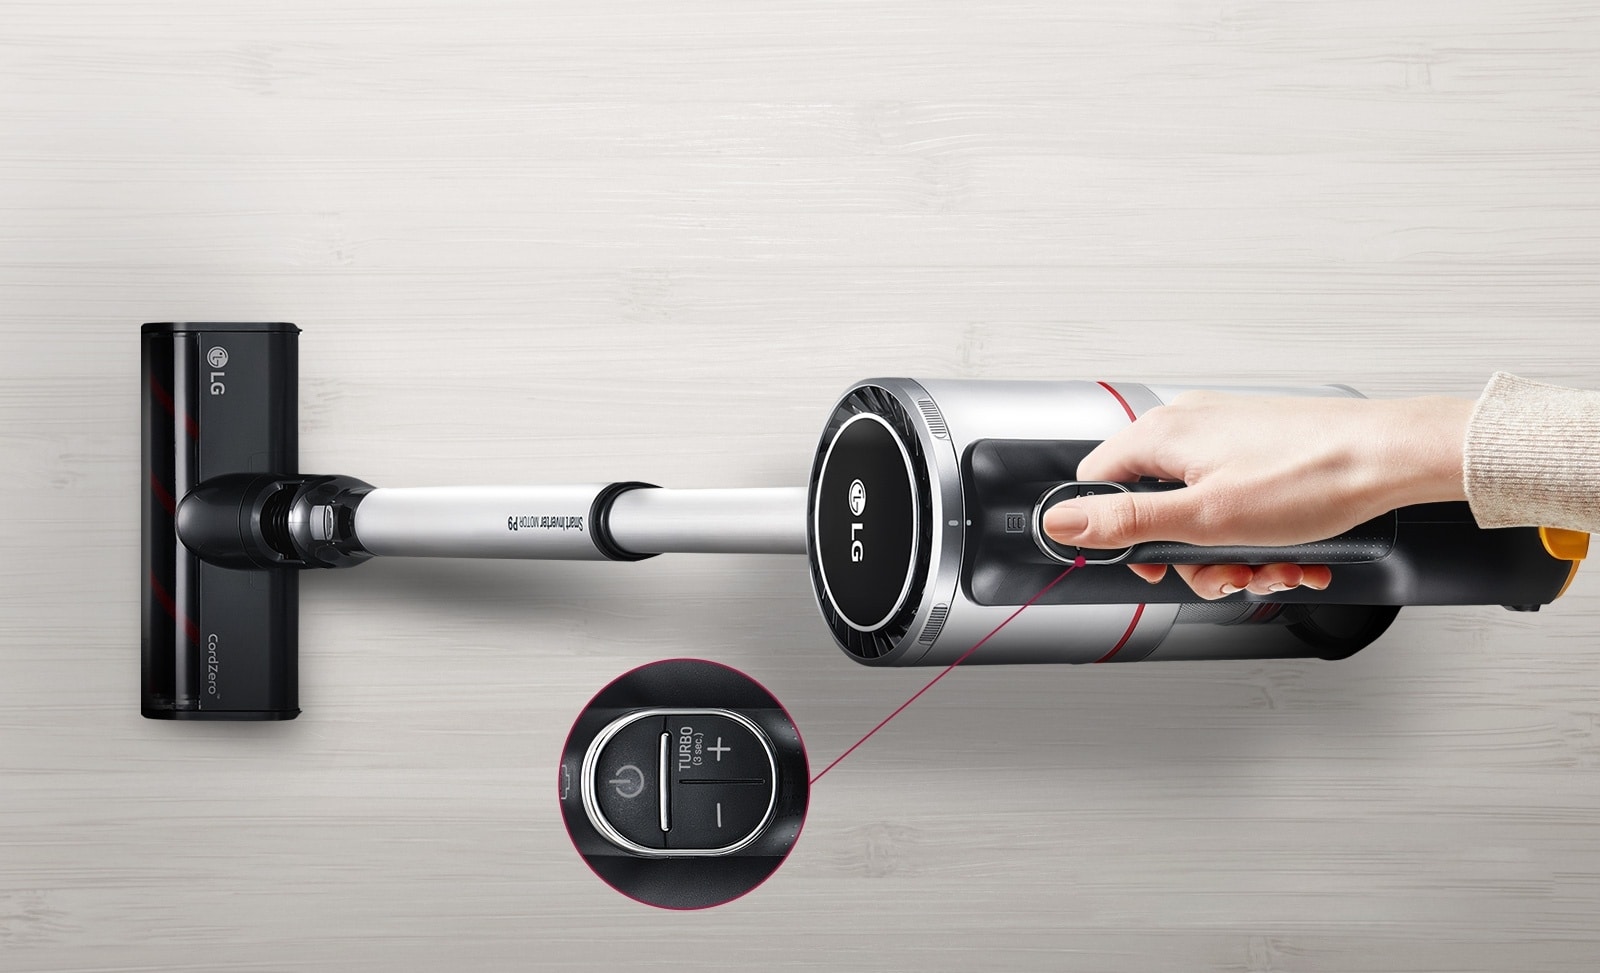 Image of hand holding a cordless stick vacuum, close up image of ON button including Turbo mode.